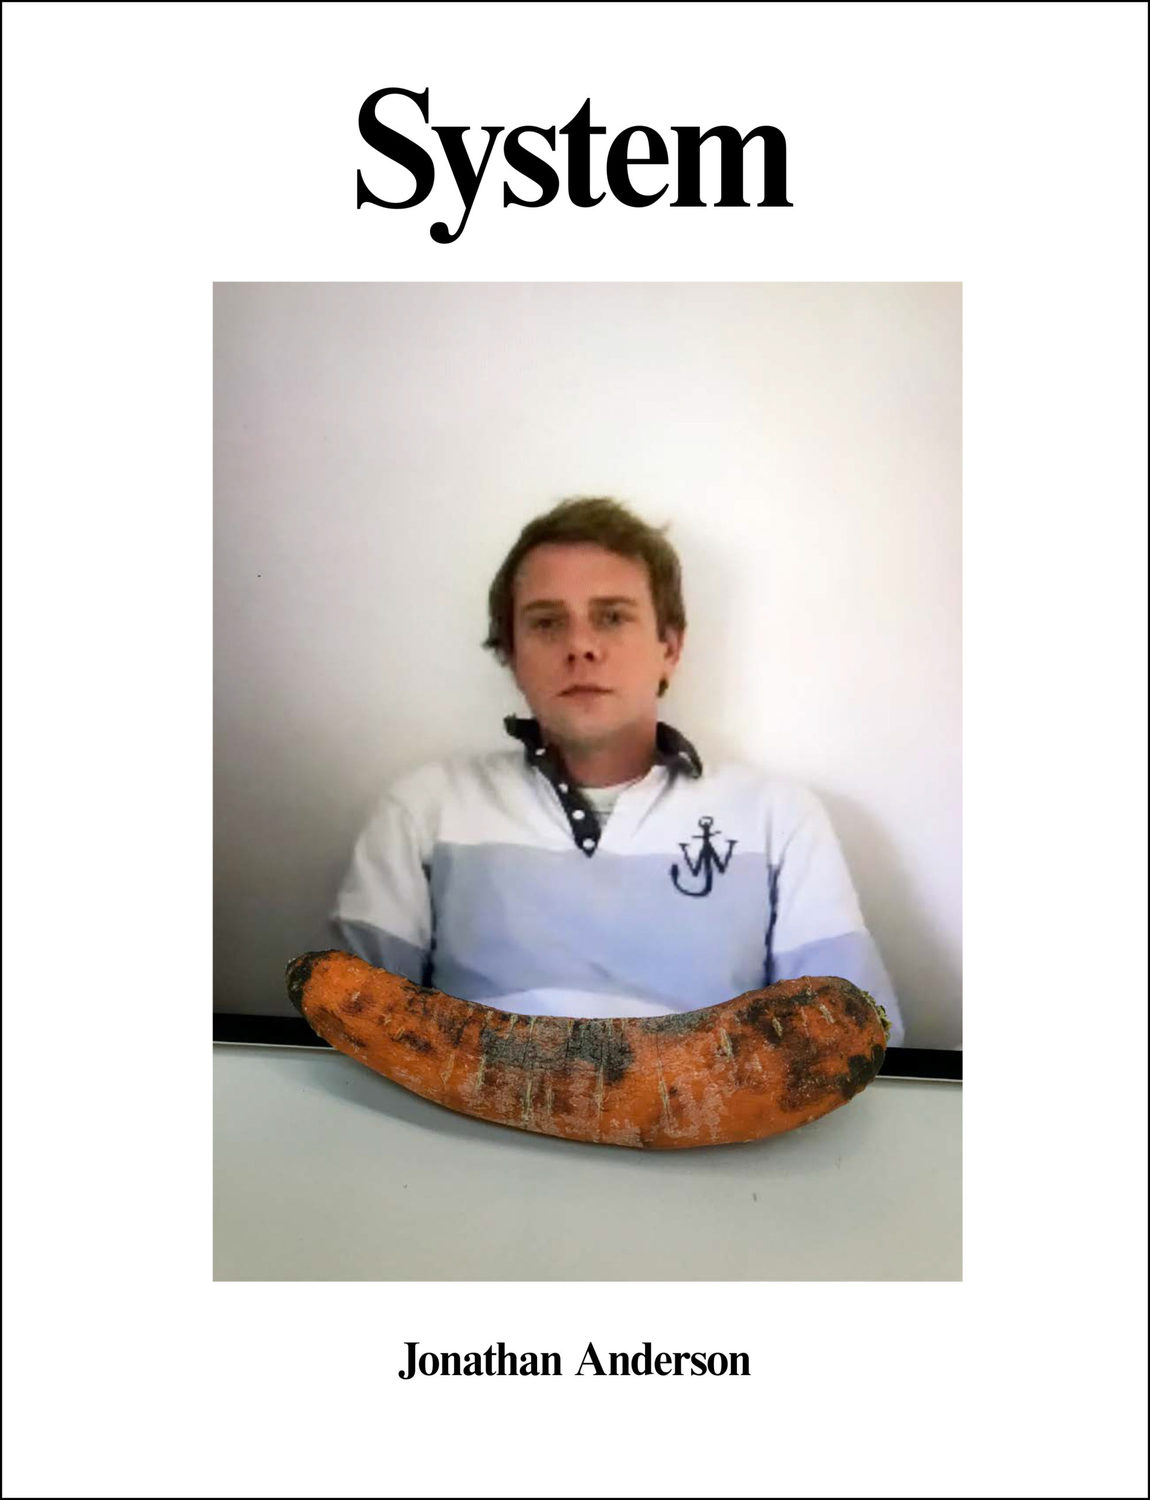 SYSTEM15-COVER-Jonathan-Anderson-scaled.jpg